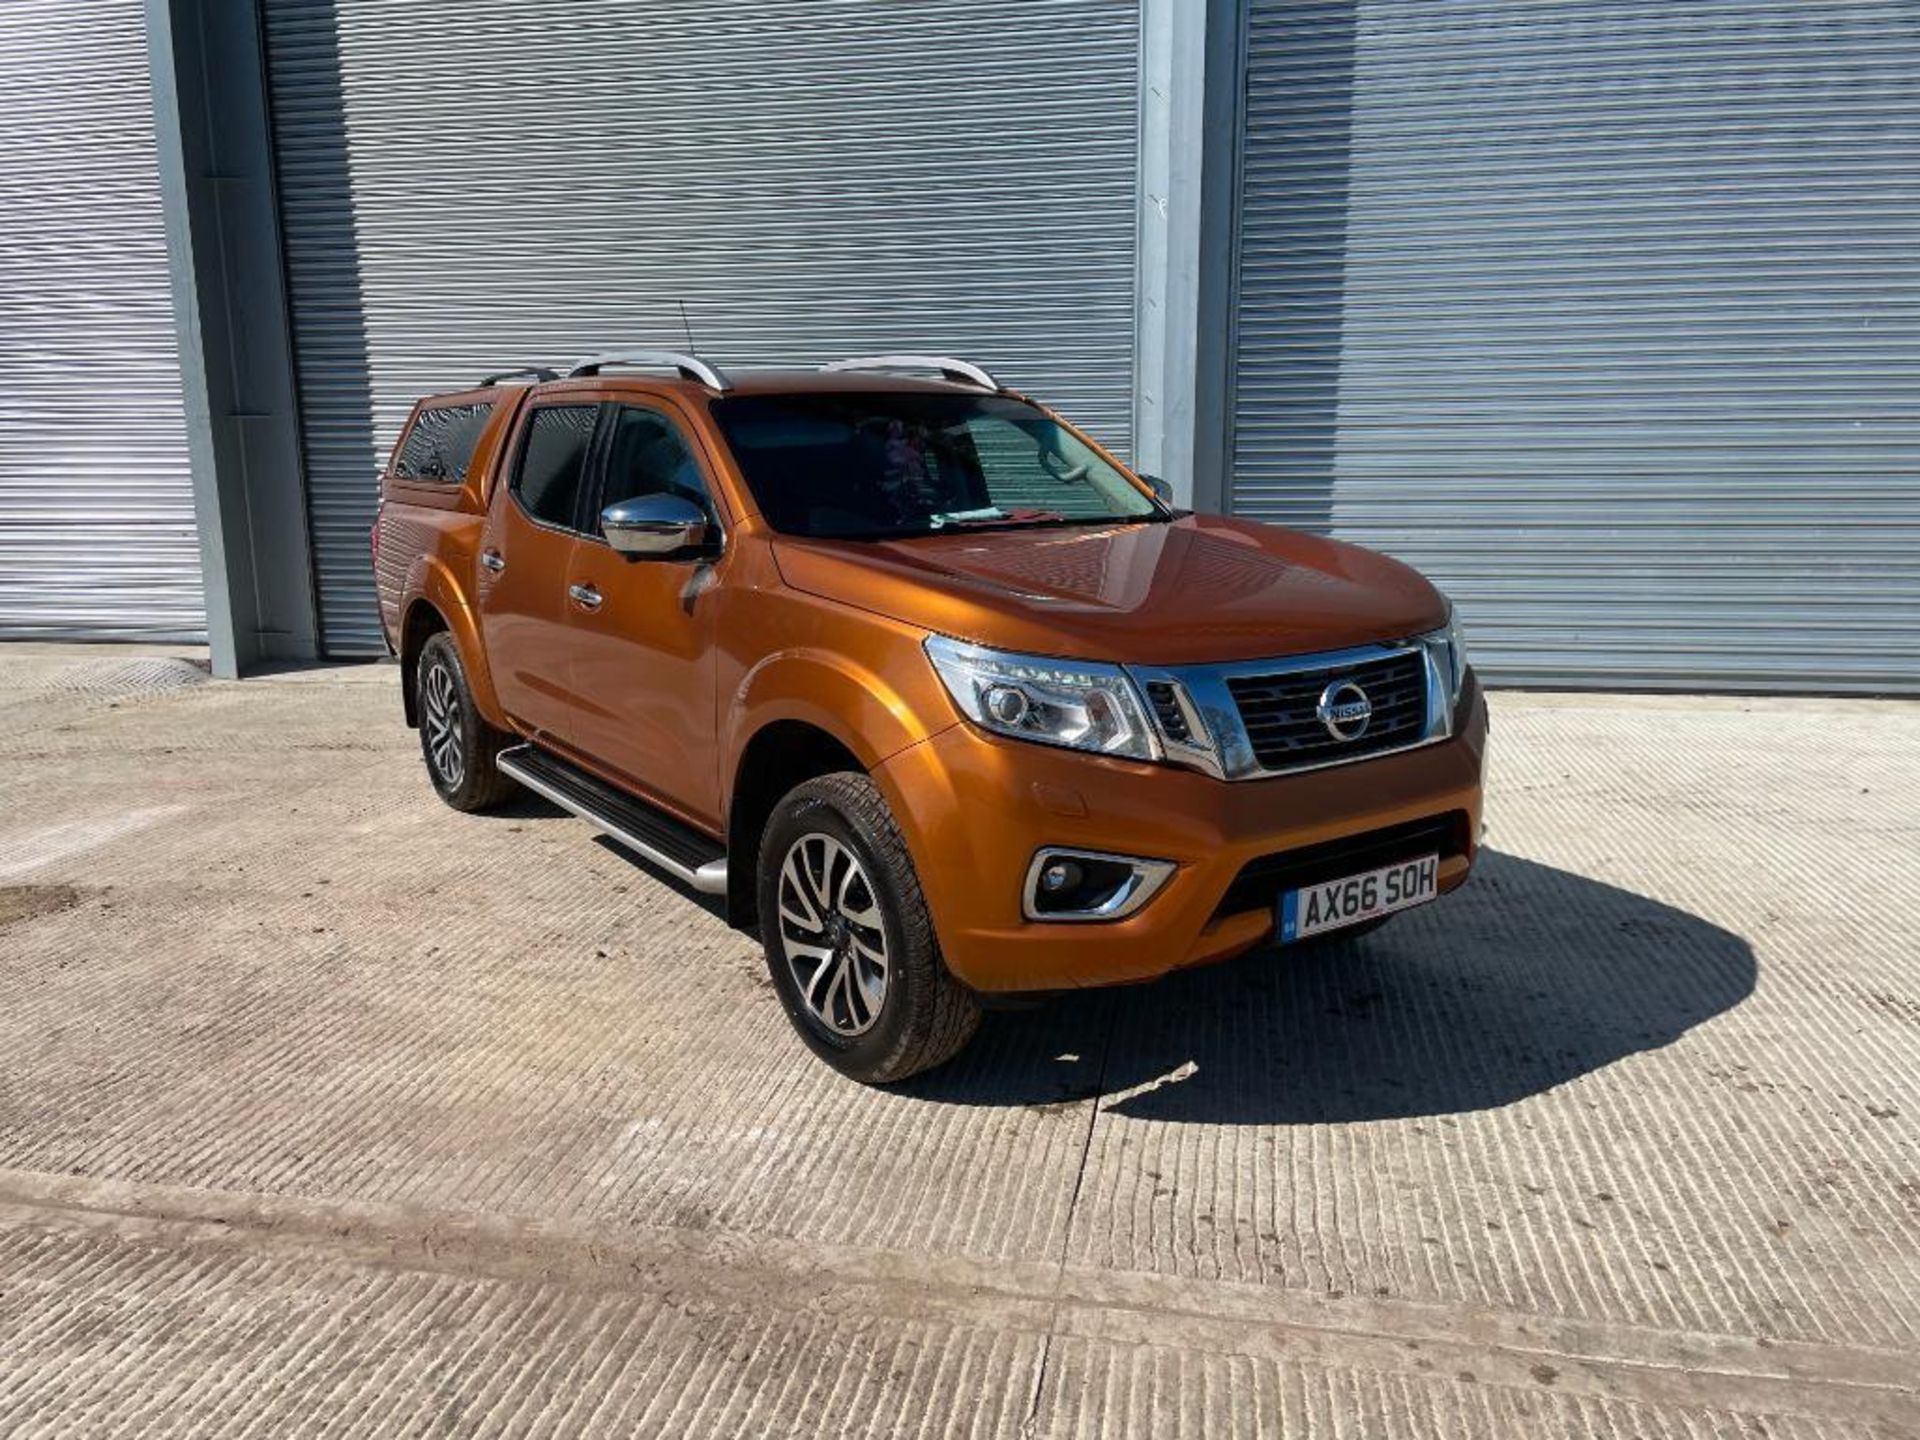 2016 Nissan Navara Techna 4wd pickup with Pegasus hard top, 4 door, diesel, automatic, leather uphol - Image 14 of 14